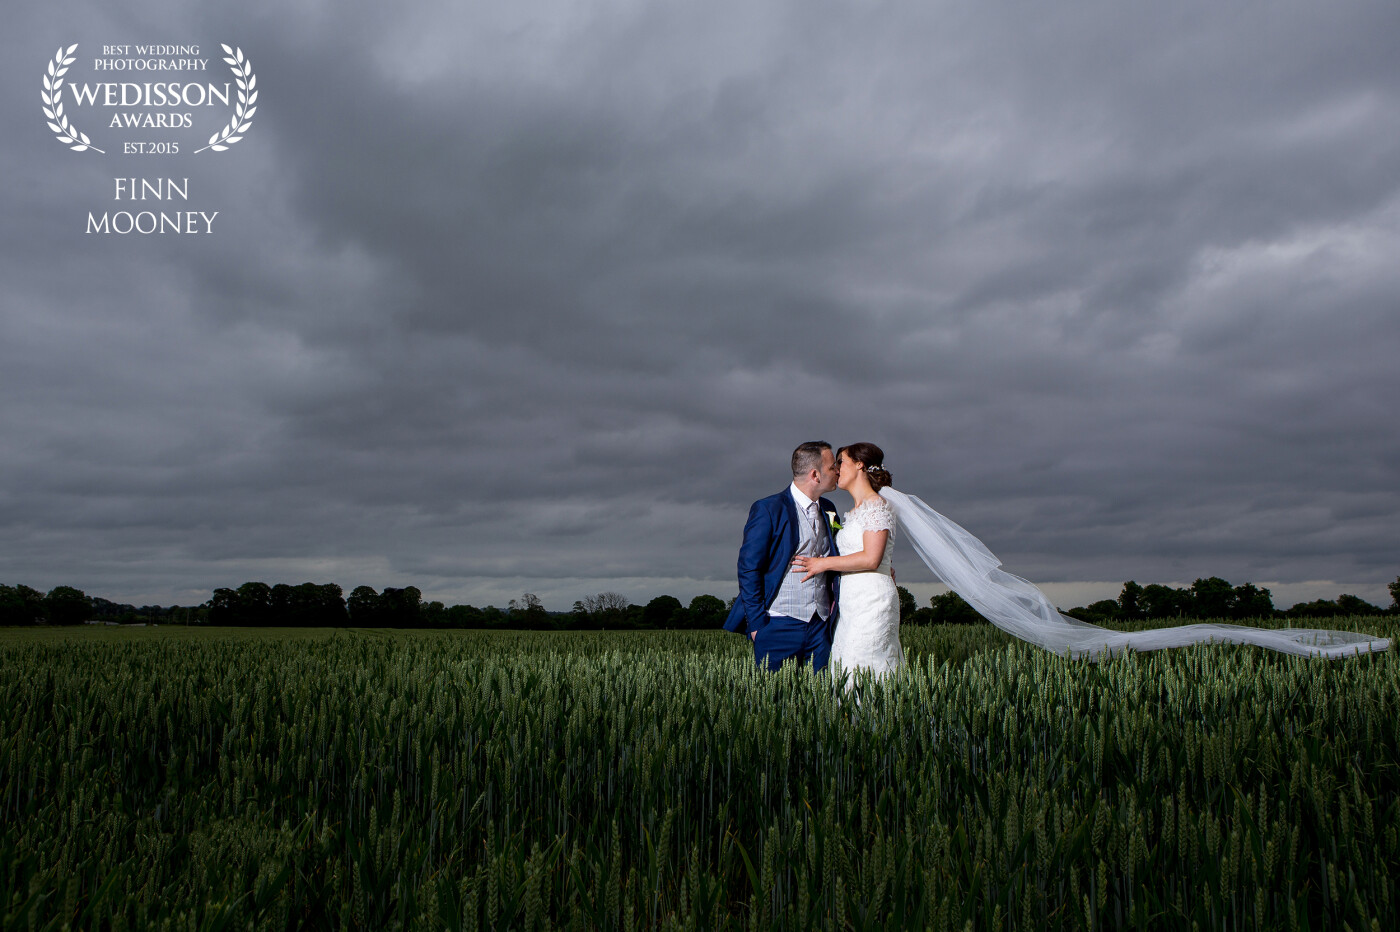 The wedding of Johnathan + Richelle, a really lovely relaxed and fun couple. We were on our way from the church to the reception venue and seen this beautiful field, so decided to stop for a shot, the crops were the perfect height for the veil to sit on and allow a strong composition.